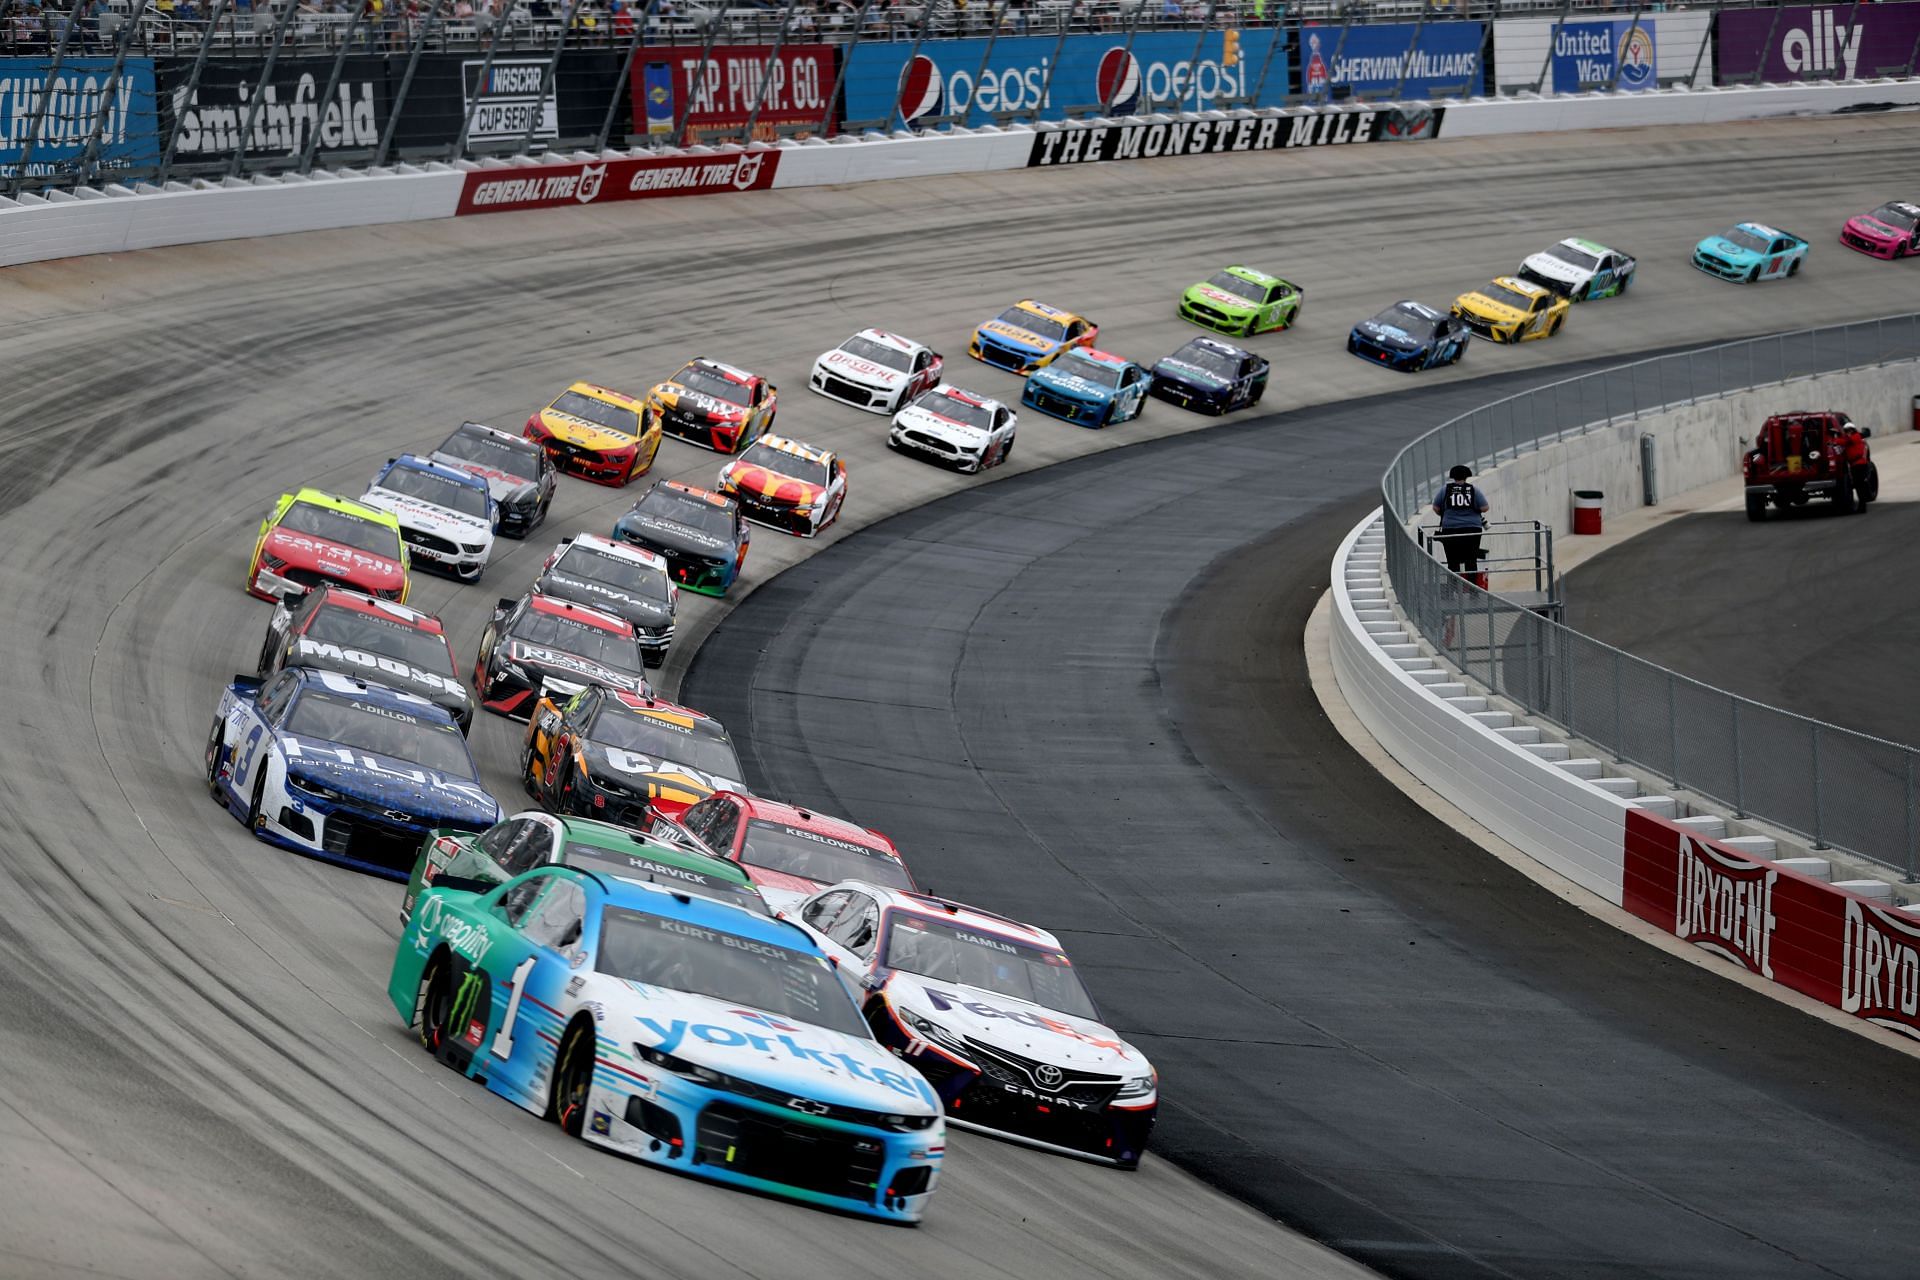 The field takes a pace car lap during the NASCAR Cup Series Drydene 400 at Dover International Speedway.